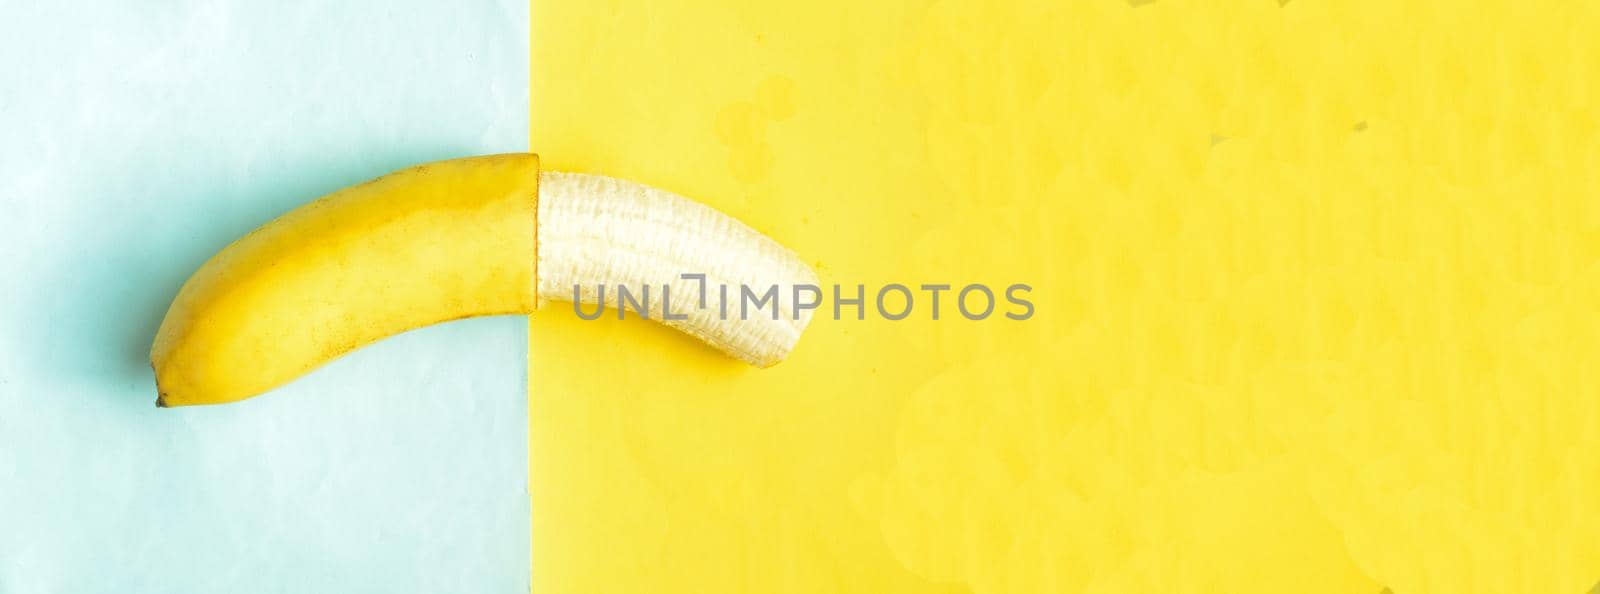 One partially peeled banana on blue yellow background, by andre_dechapelle